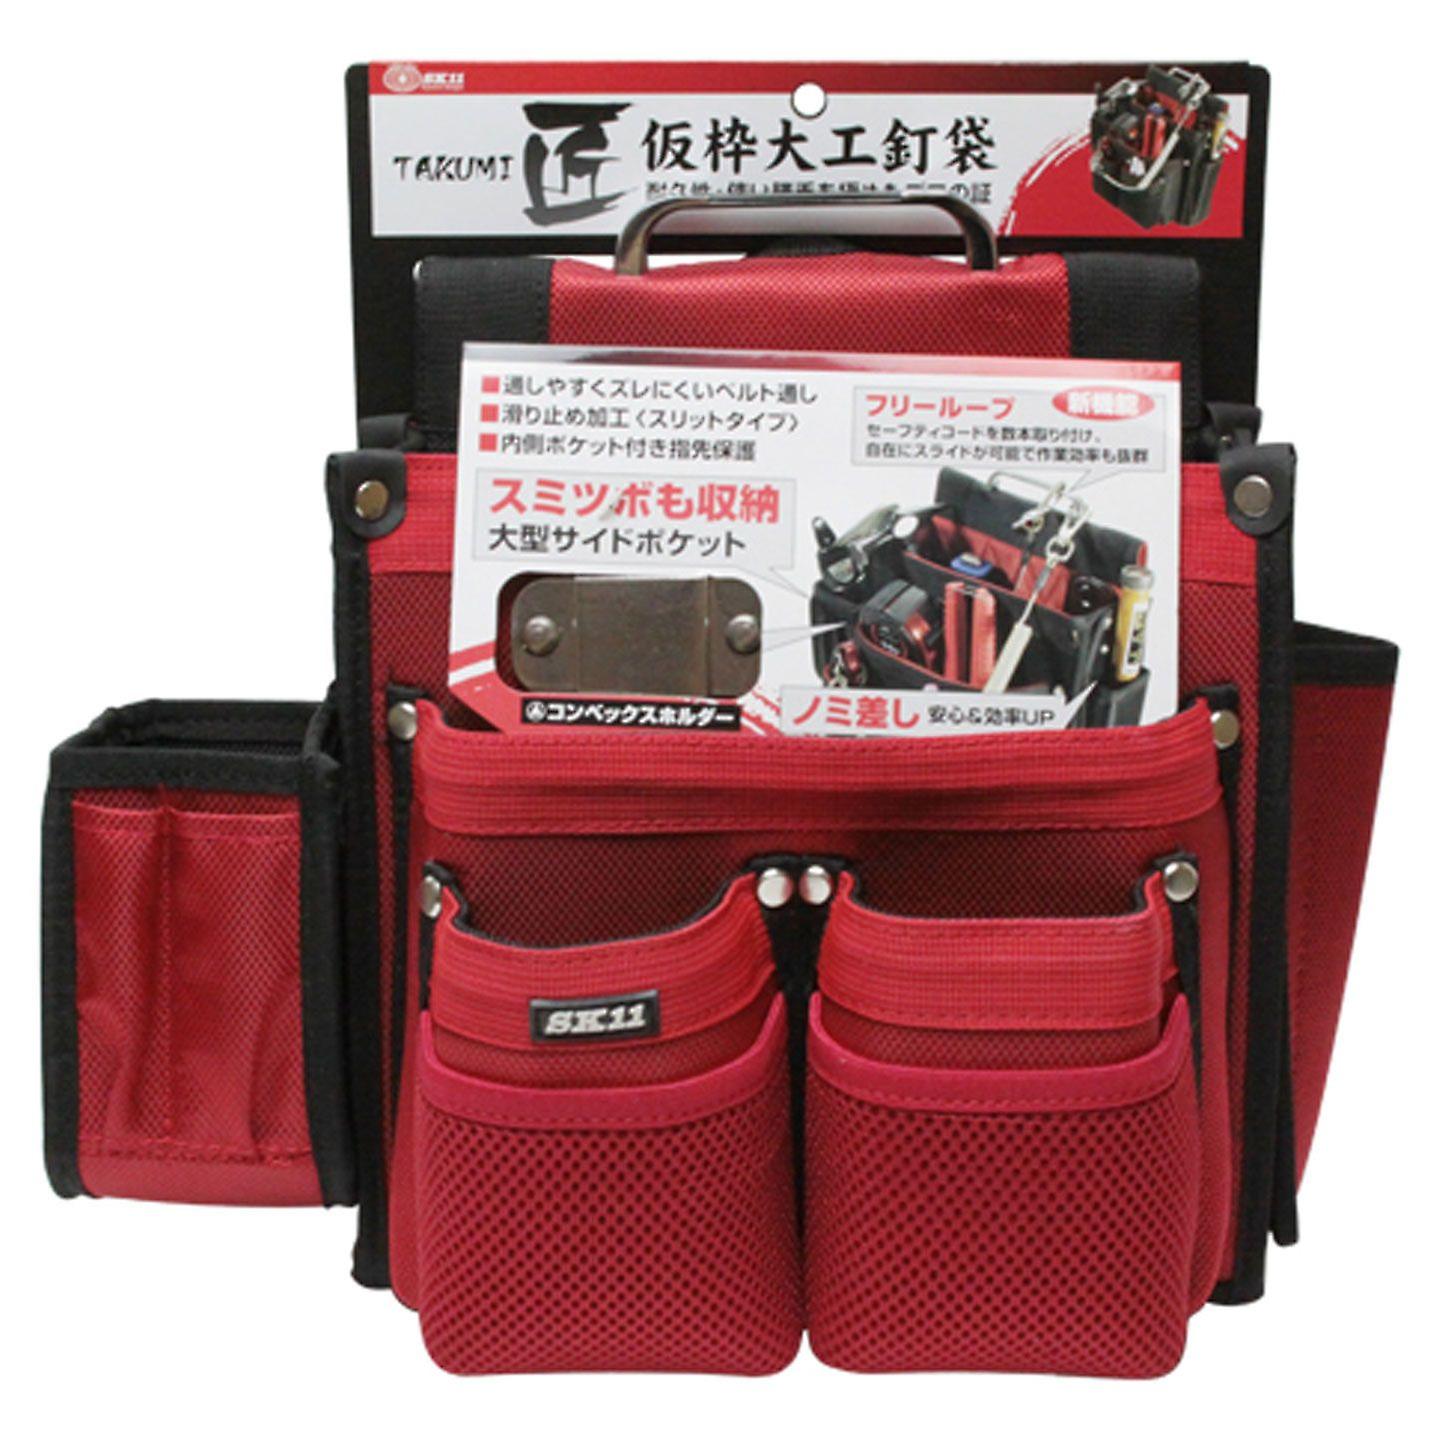 SK11 Takumi SC-11 Heavy Duty Carpenter 9 Pouch Tool and Nail Belt Bag Red， for Carrying all kinds of Tools and Hardware